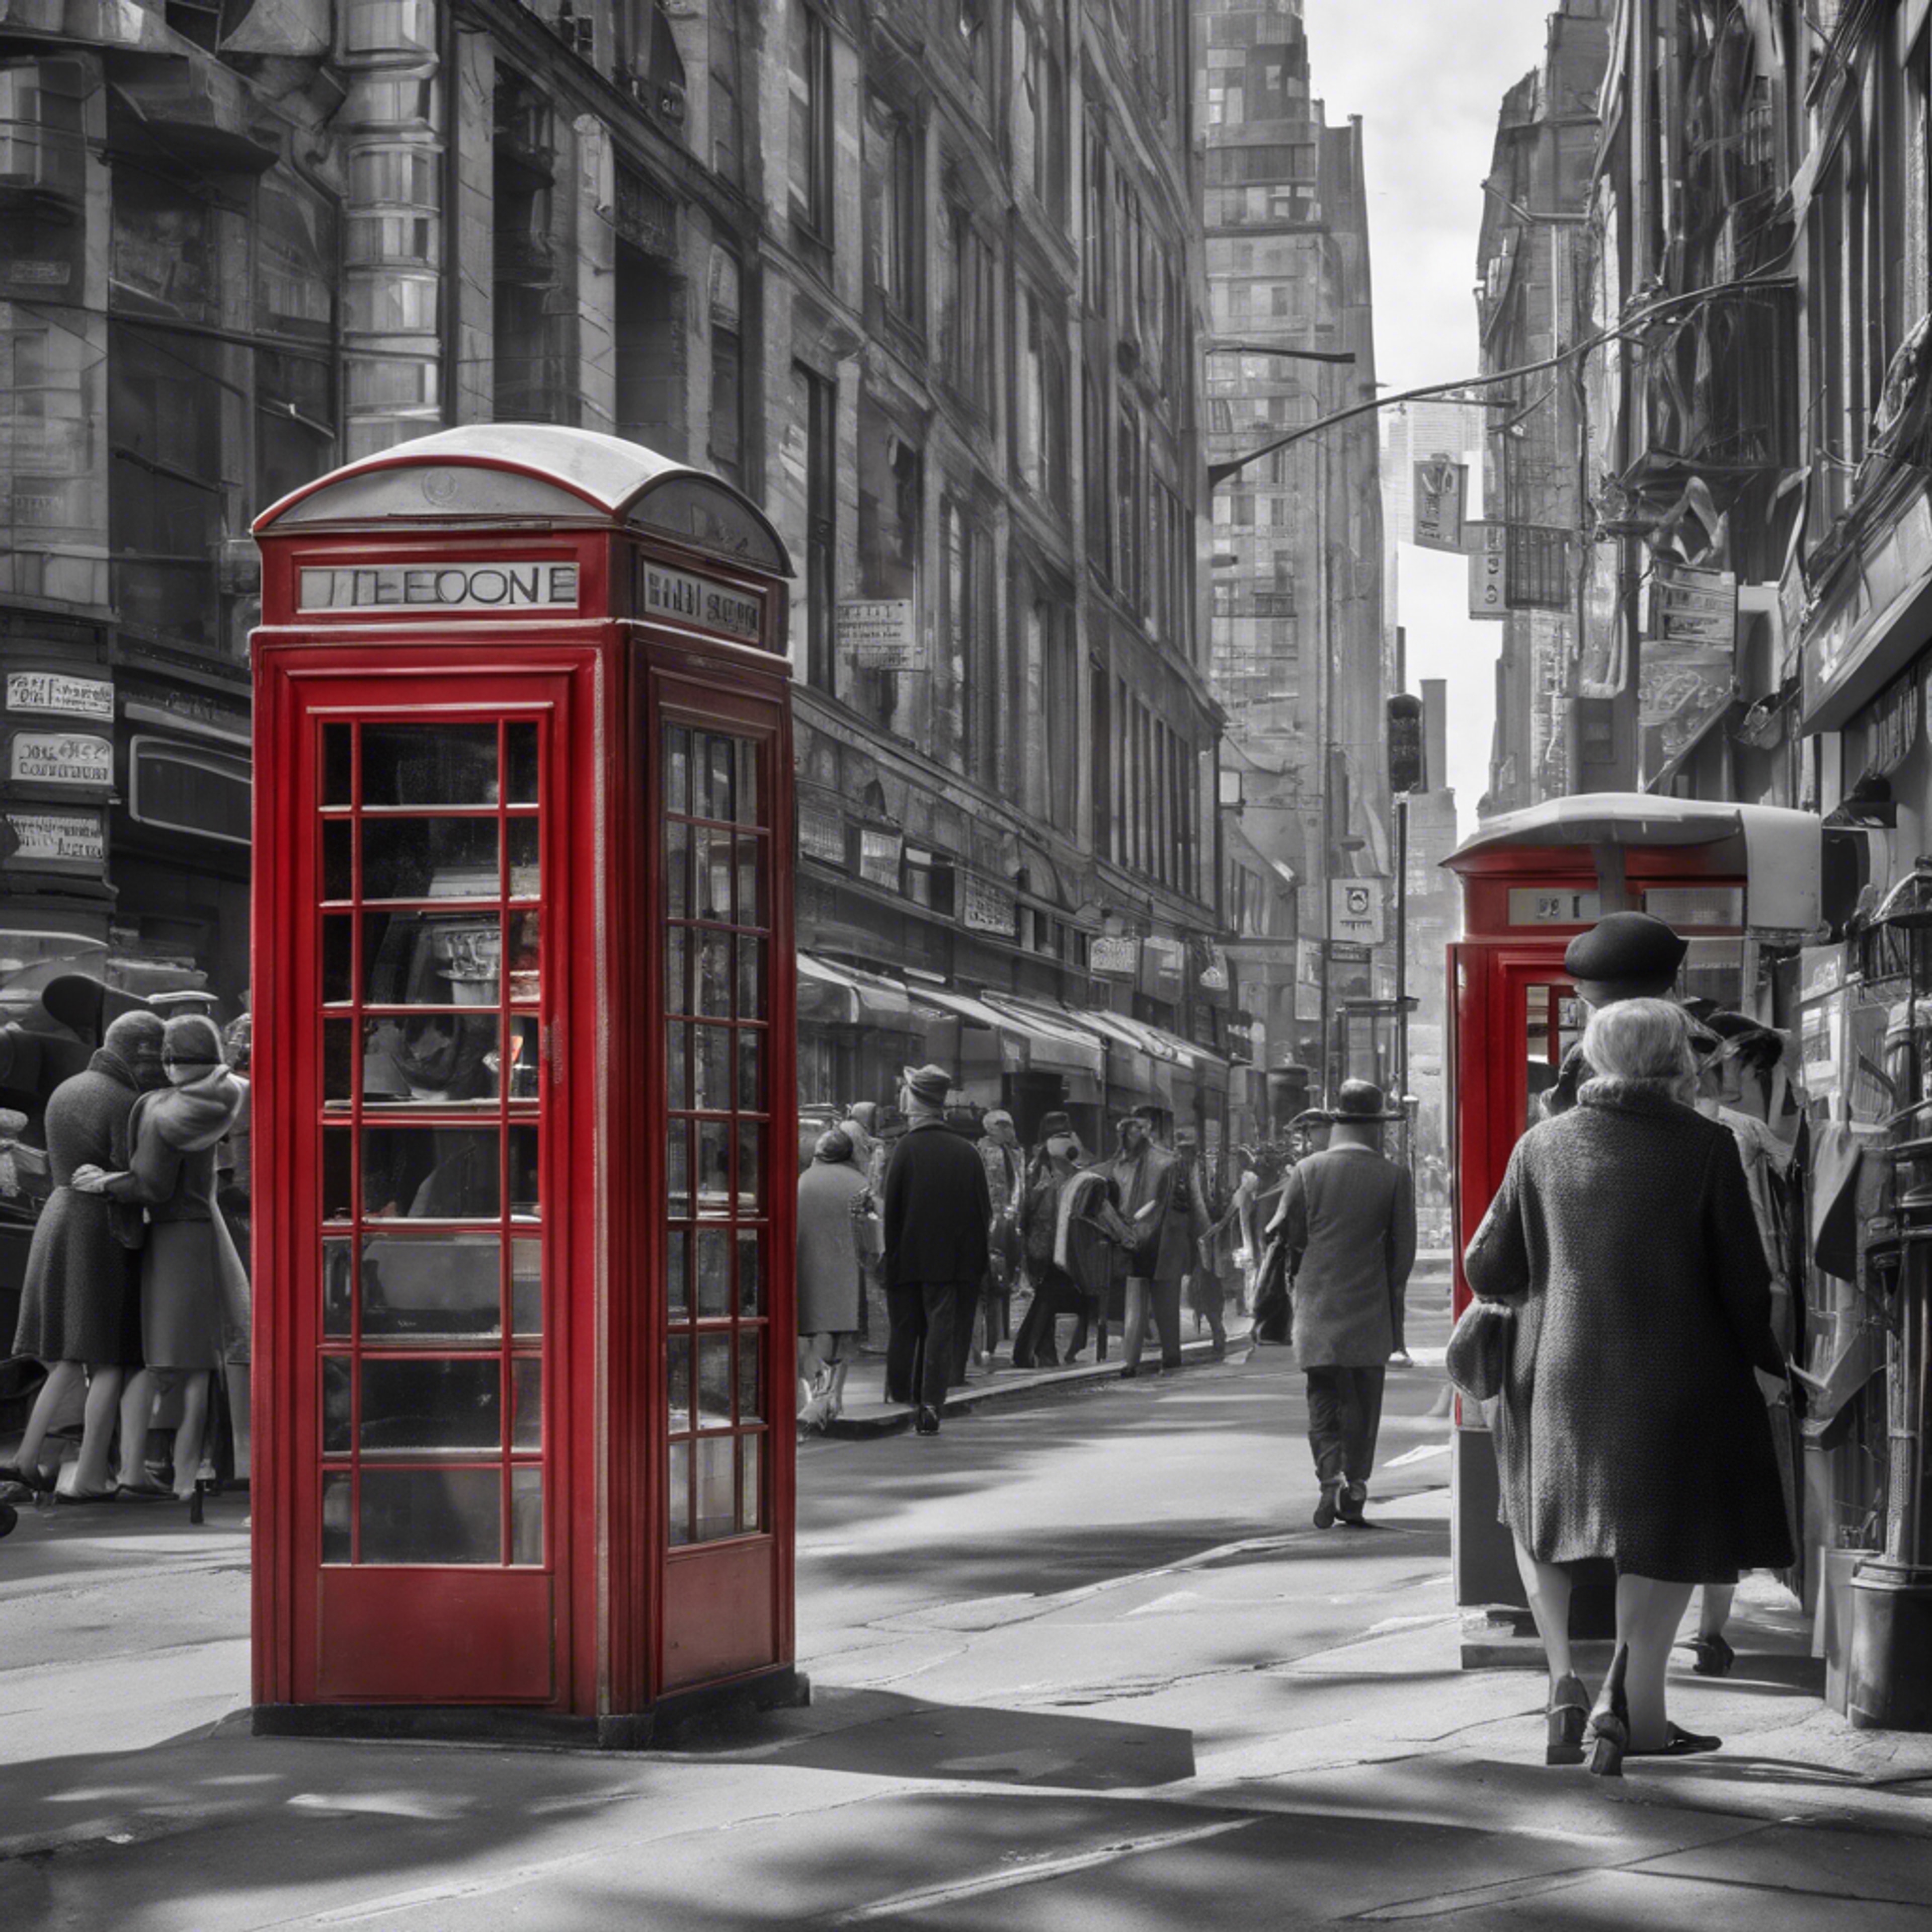 A black and white picture of a busy city street in the 1960s, with one characteristic iconic red phone booth. Ταπετσαρία[8cad1b57085c4579b492]